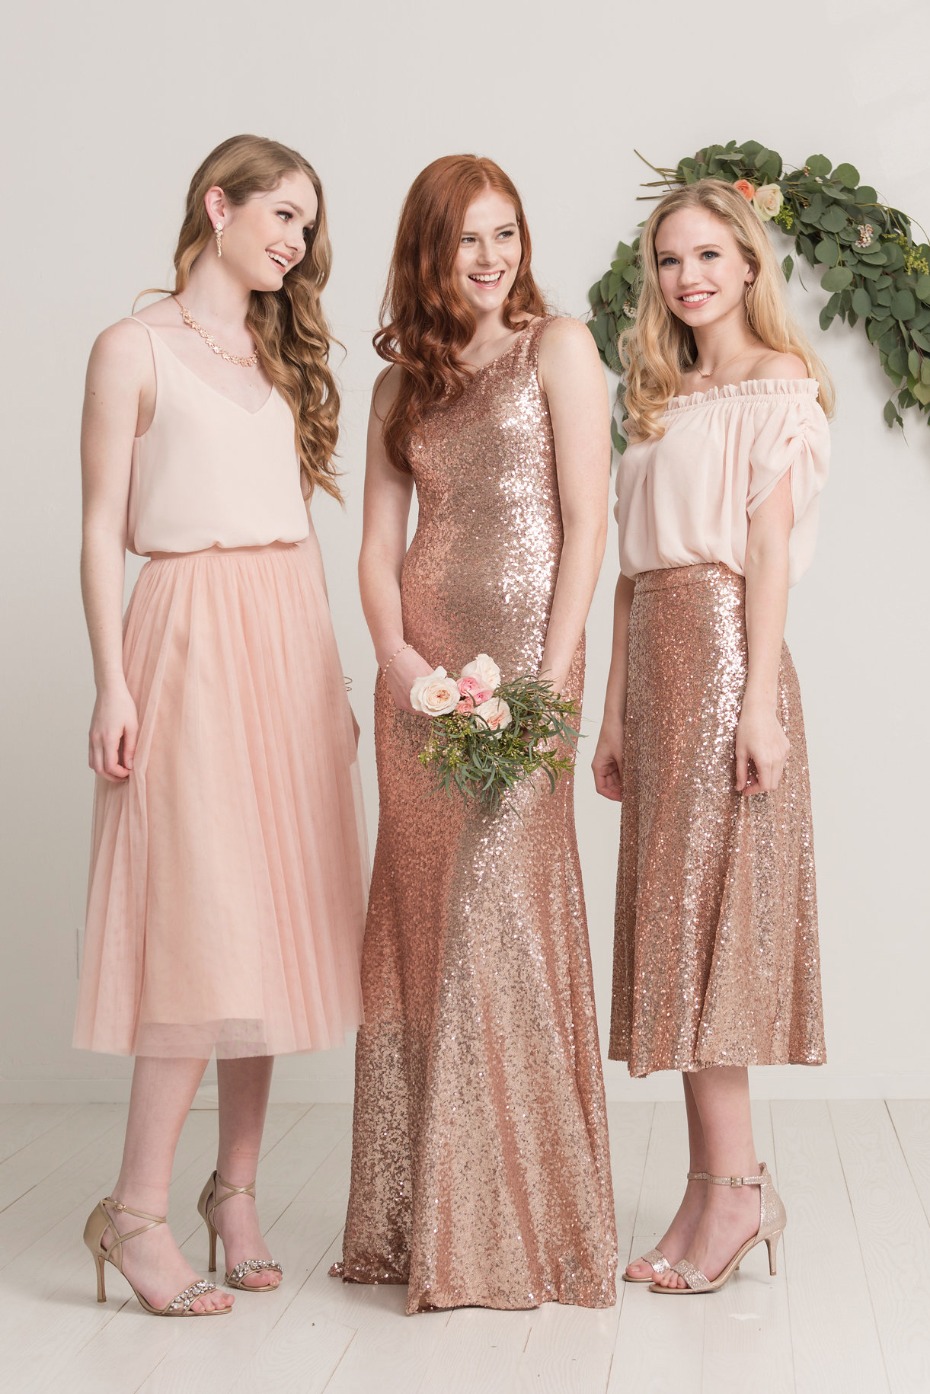 Mix and match bridesmaid dresses from Love Tanya